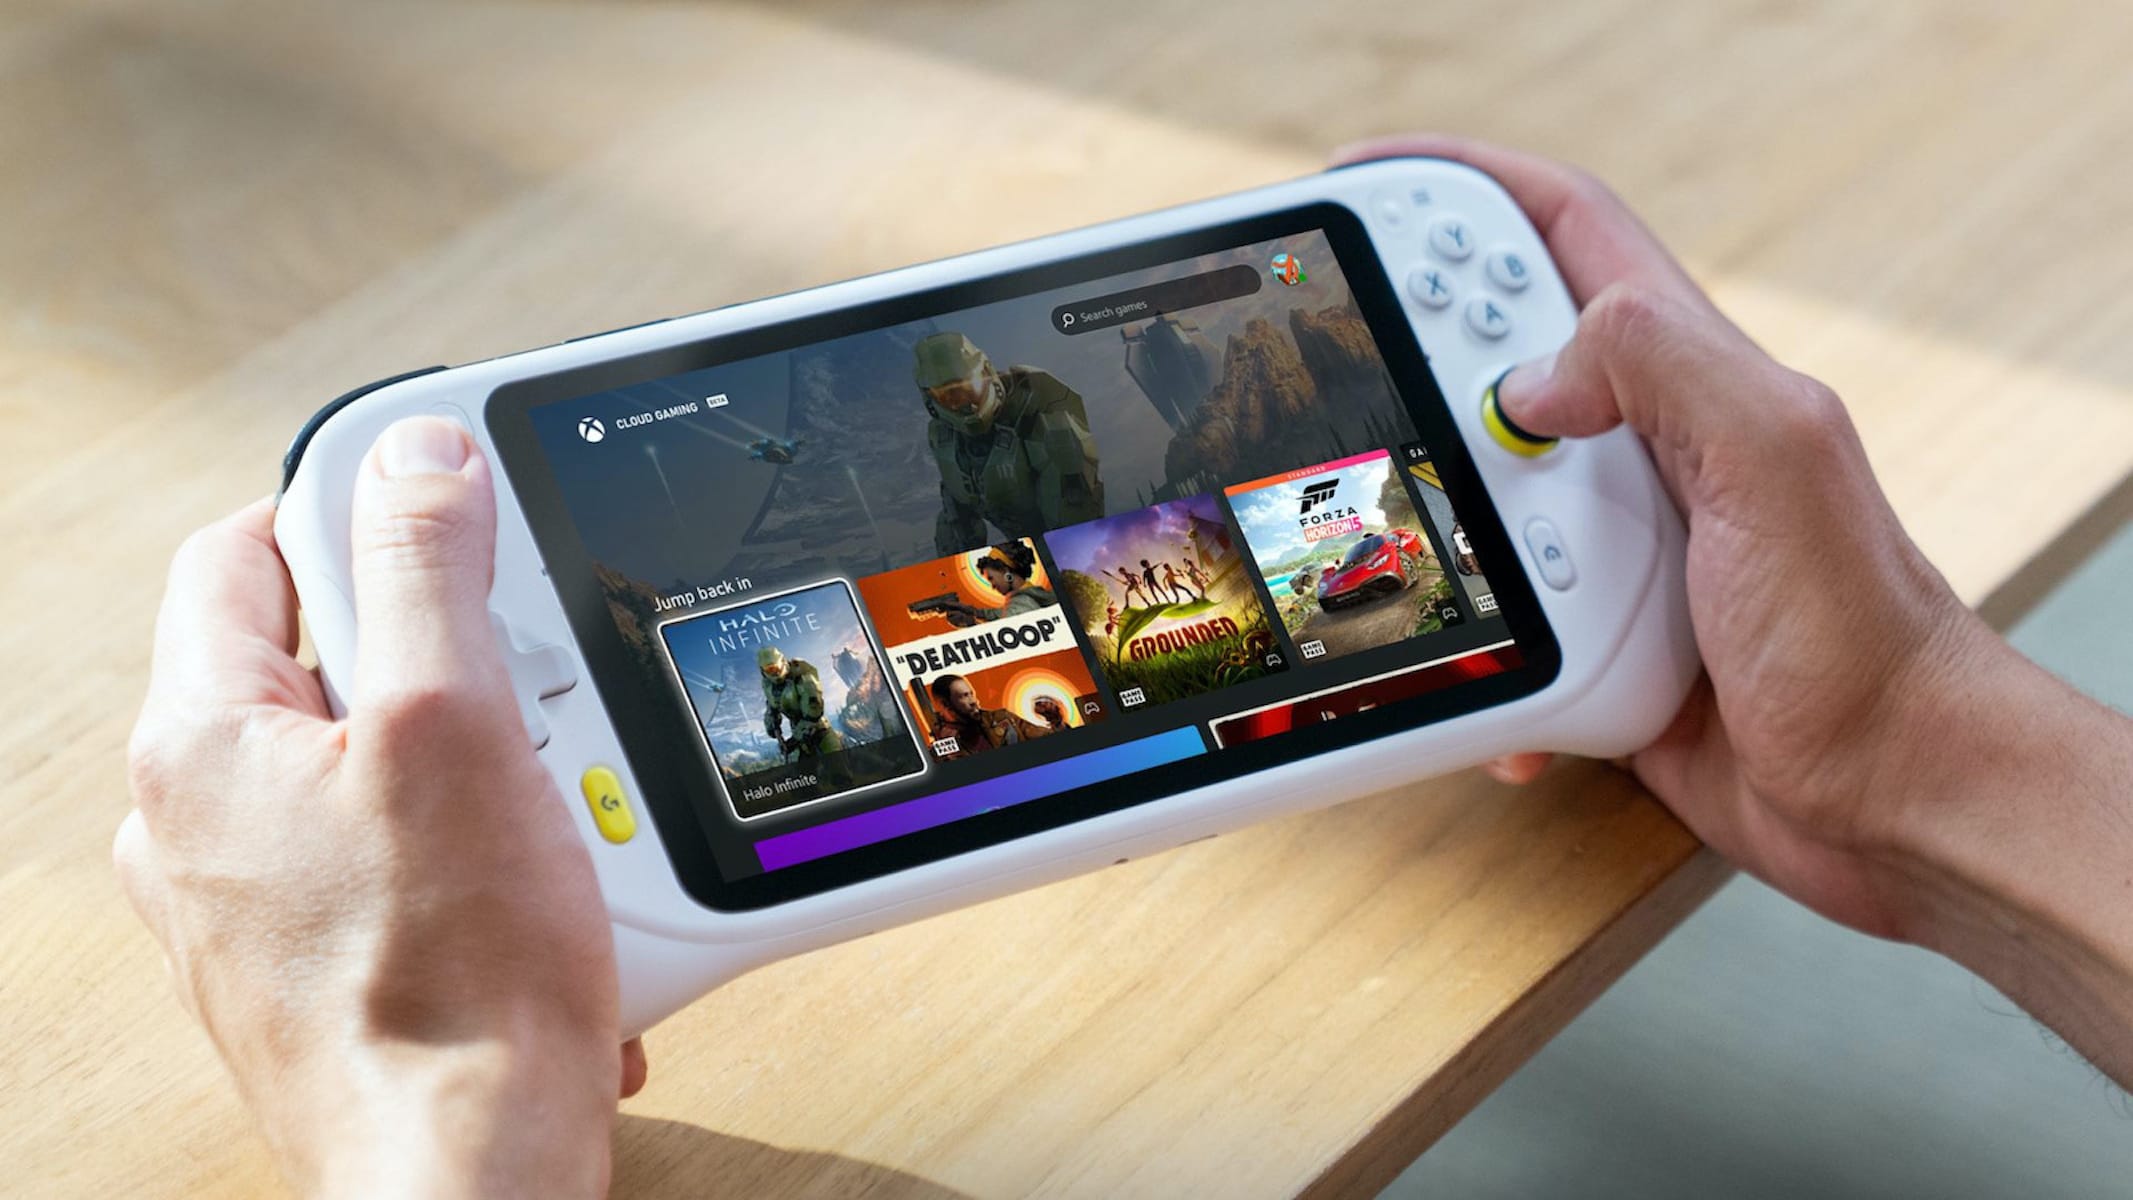 https://thegadgetflow.com/wp-content/uploads/2022/10/The-best-handheld-gaming-gadgets-of-2022-blog-featured.jpeg